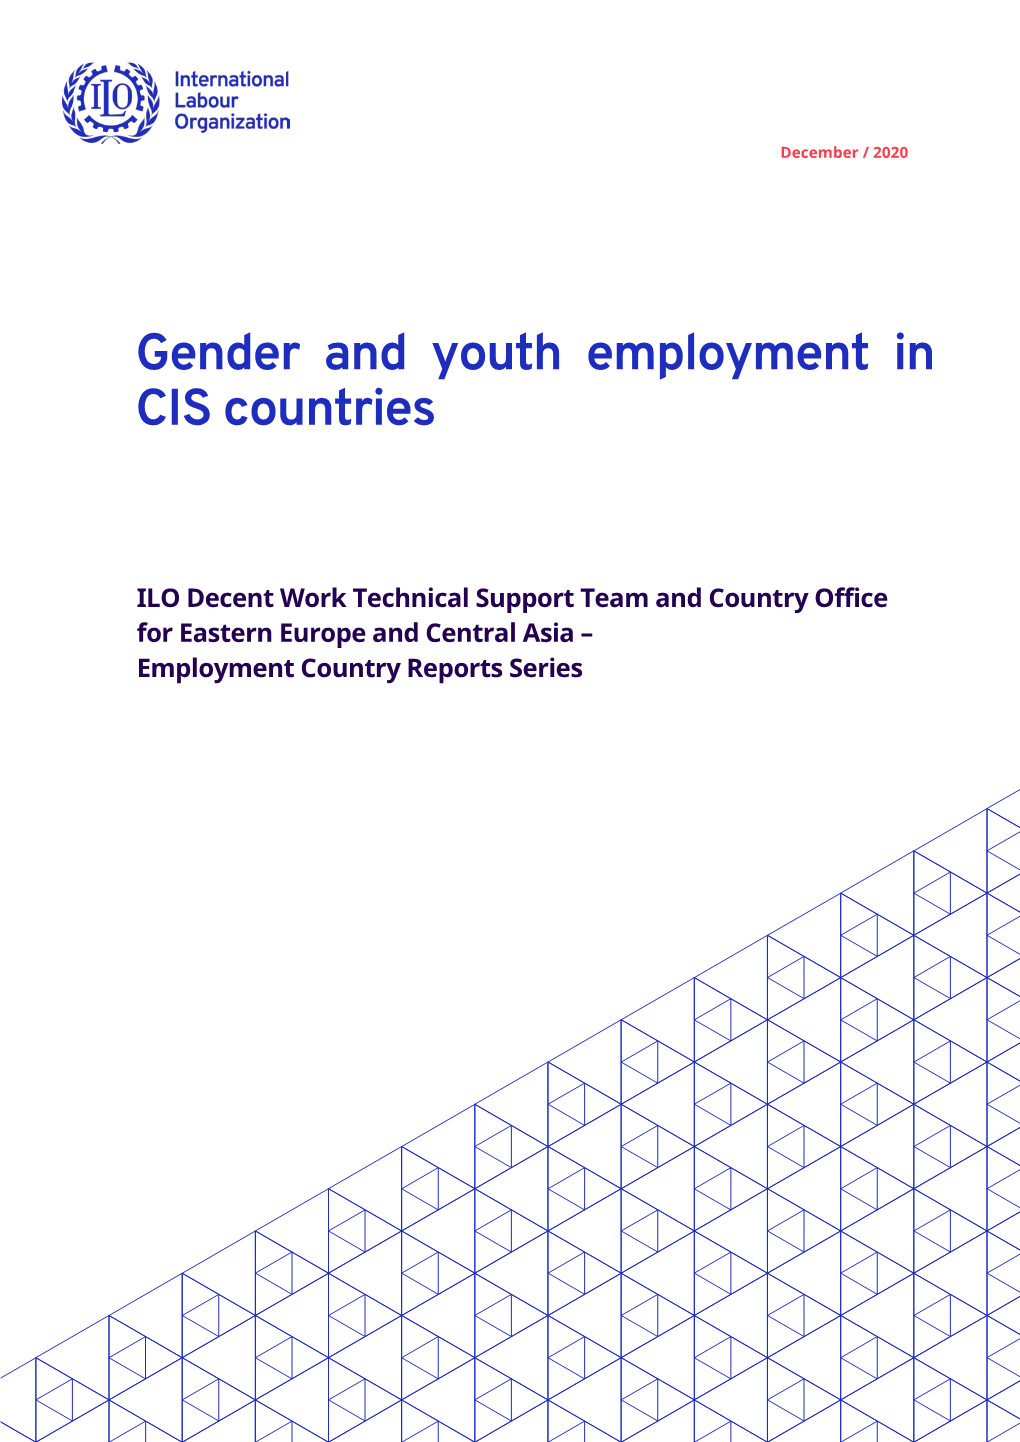 Gender and Youth Employment in CIS Countriespdf